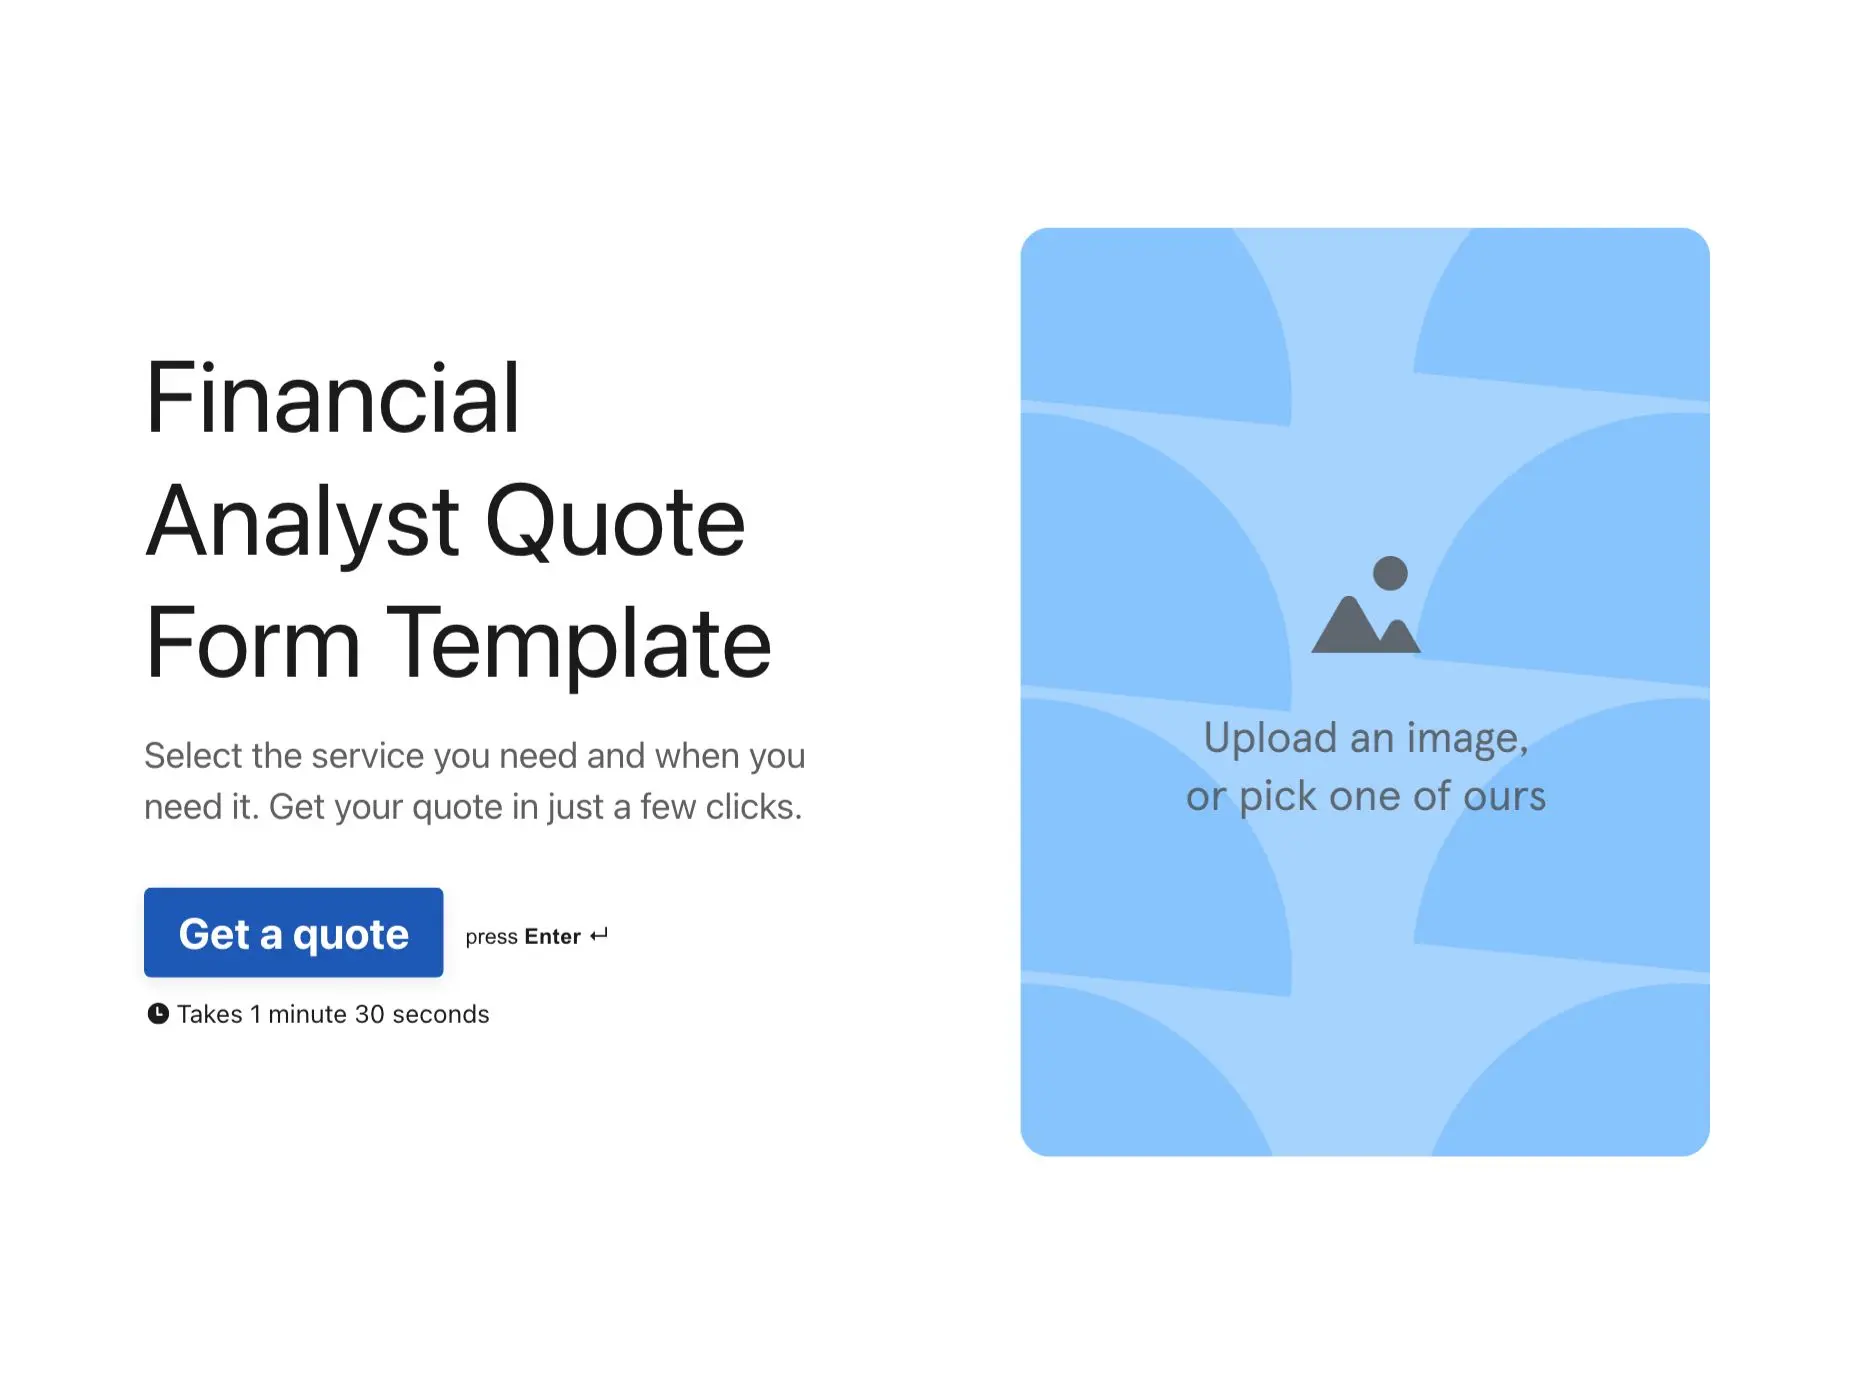 Financial Analyst Quote Form Template Hero